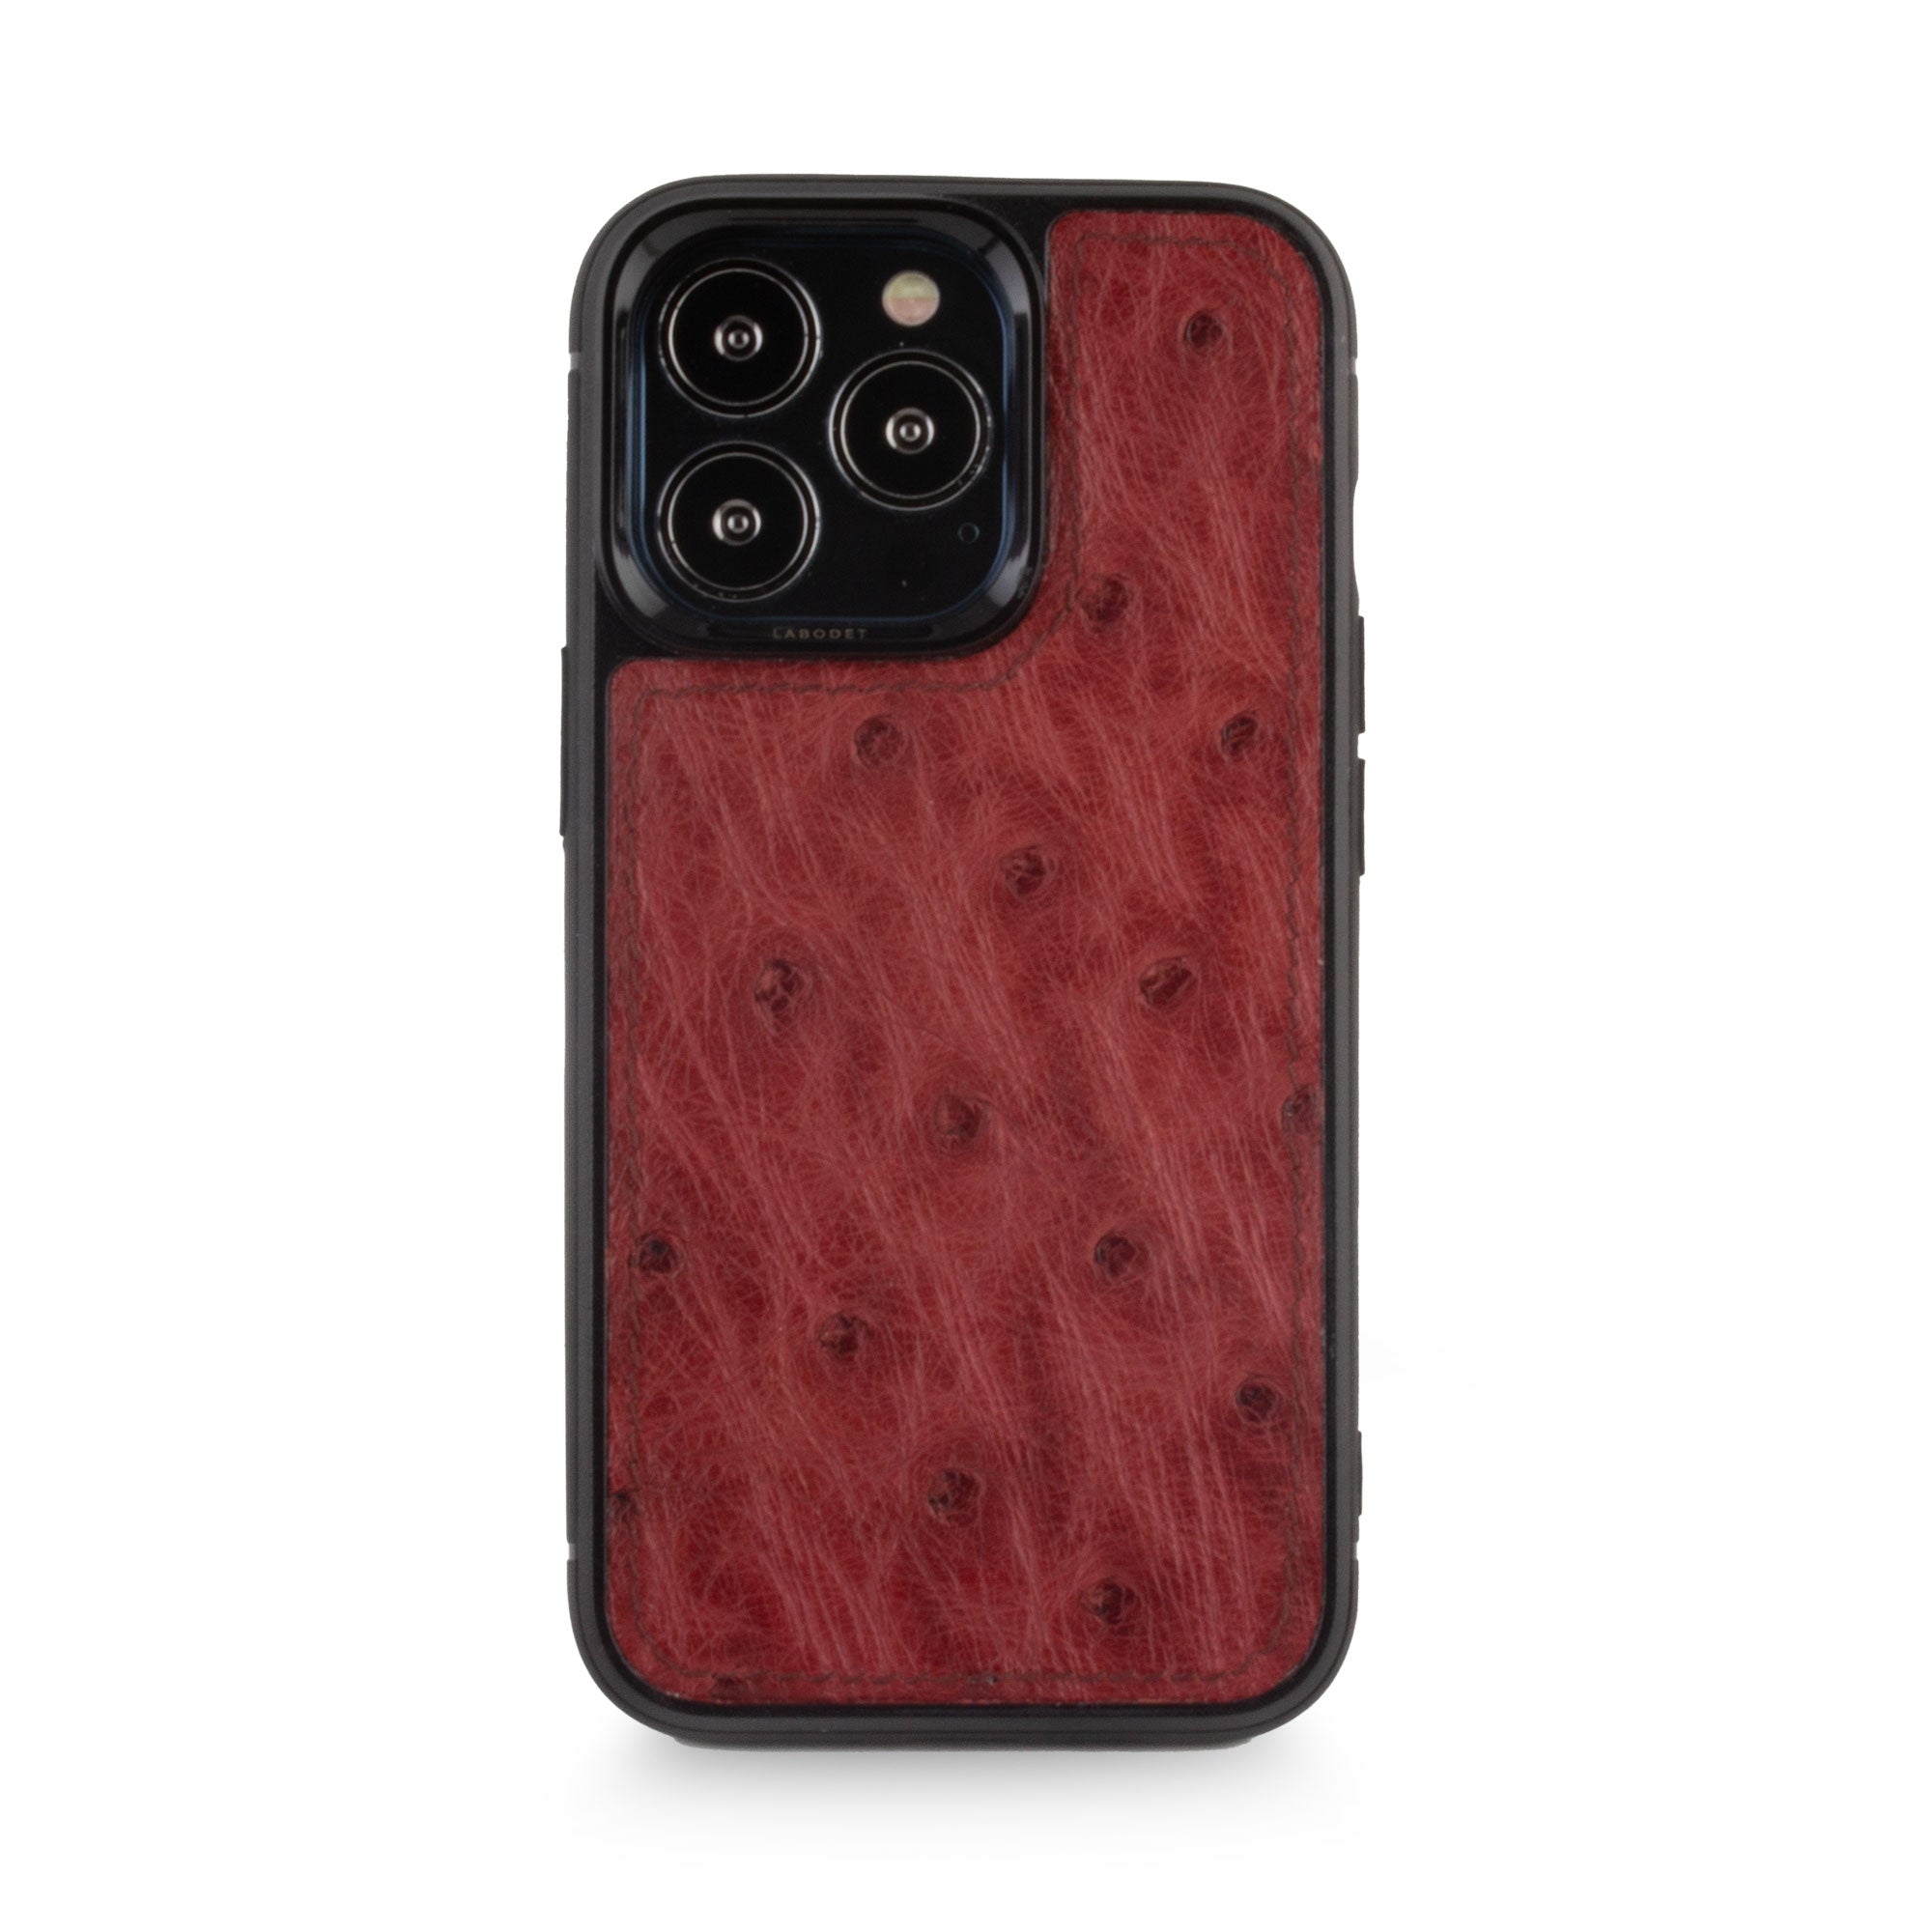 Clearance Sale - Leather iPhone "Sport Case" - iPhone 13 Pro - Burgundy ostrich